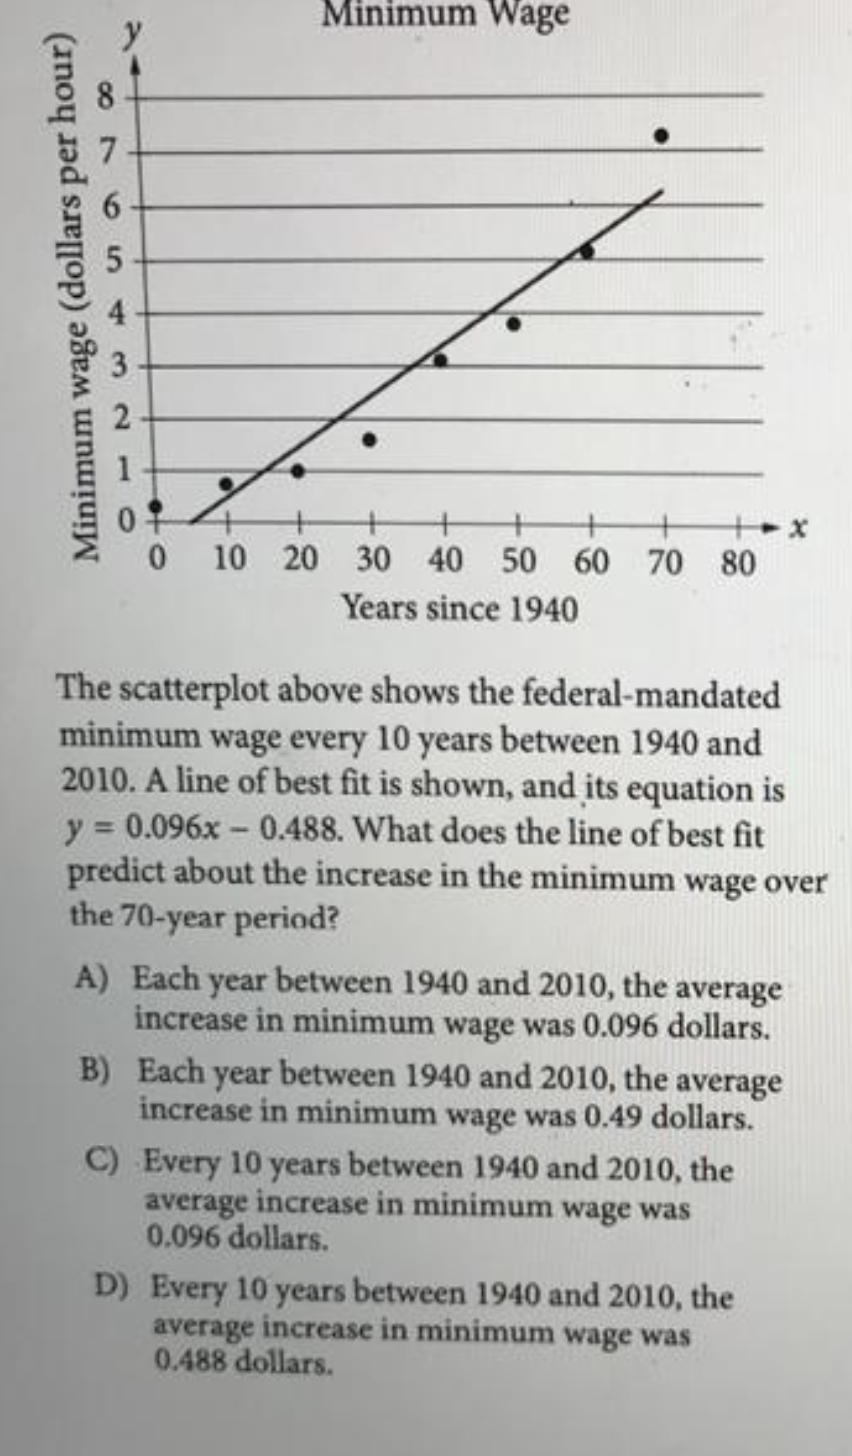 Minimum Wage
y
8
0 10 20 30 40 50 60 70 80
Years since 1940
The scatterplot above shows the federal-mandated
minimum wage every 10 years between 1940 and
2010. A line of best fit is shown, and its equation is
y 0.096x - 0.488. What does the line of best fit
predict about the increase in the minimum wage over
the 70-year period?
A) Each year between 1940 and 2010, the average
increase in minimum wage was 0.096 dollars.
B) Each year between 1940 and 2010, the average
increase in minimum wage was 0.49 dollars.
C) Every 10 years between 1940 and 2010, the
average increase in minimum wage was
0.096 dollars.
D) Every 10 years between 1940 and 2010, the
average increase in minimum wage was
0.488 dollars.
6
5.
4,
3.
Minimum wage (dollars per hour)
